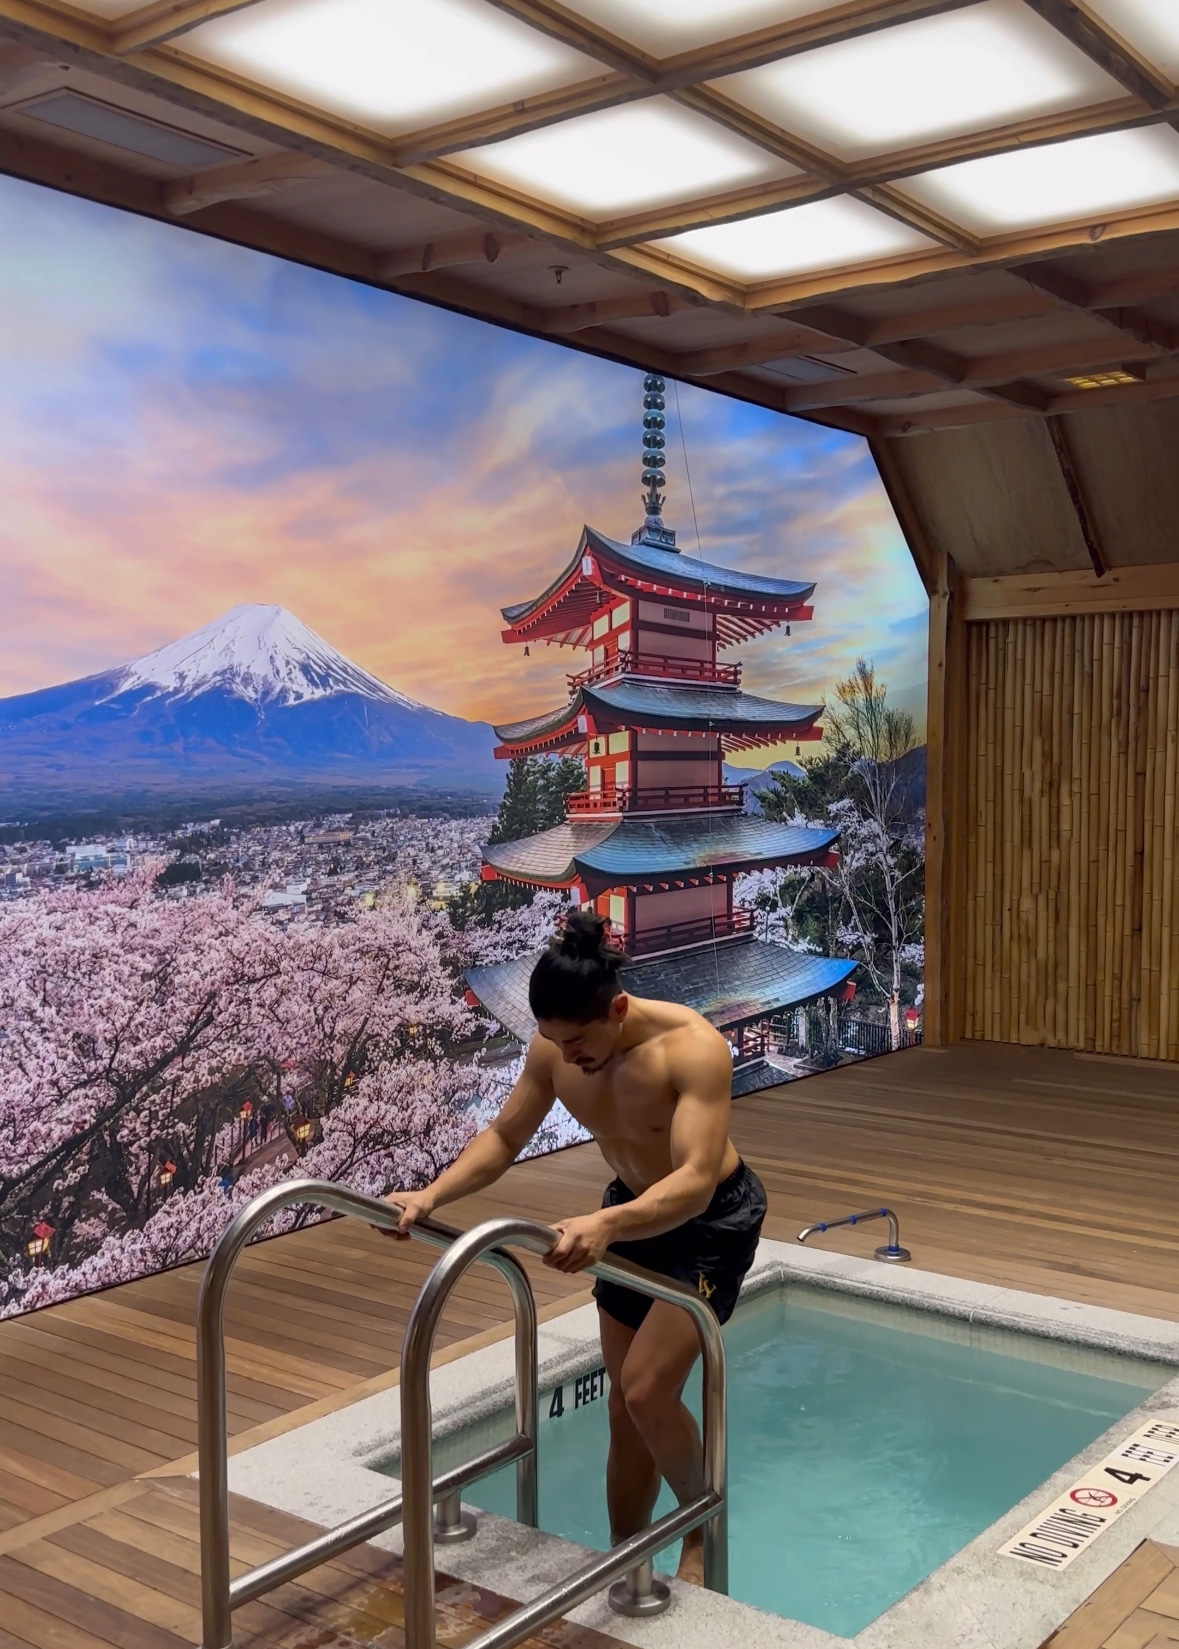 A person is stepping into a hot tub in a spa with a large mural of Mount Fuji and a pagoda surrounded by cherry blossoms in the background, creating a serene Japanese-inspired setting.